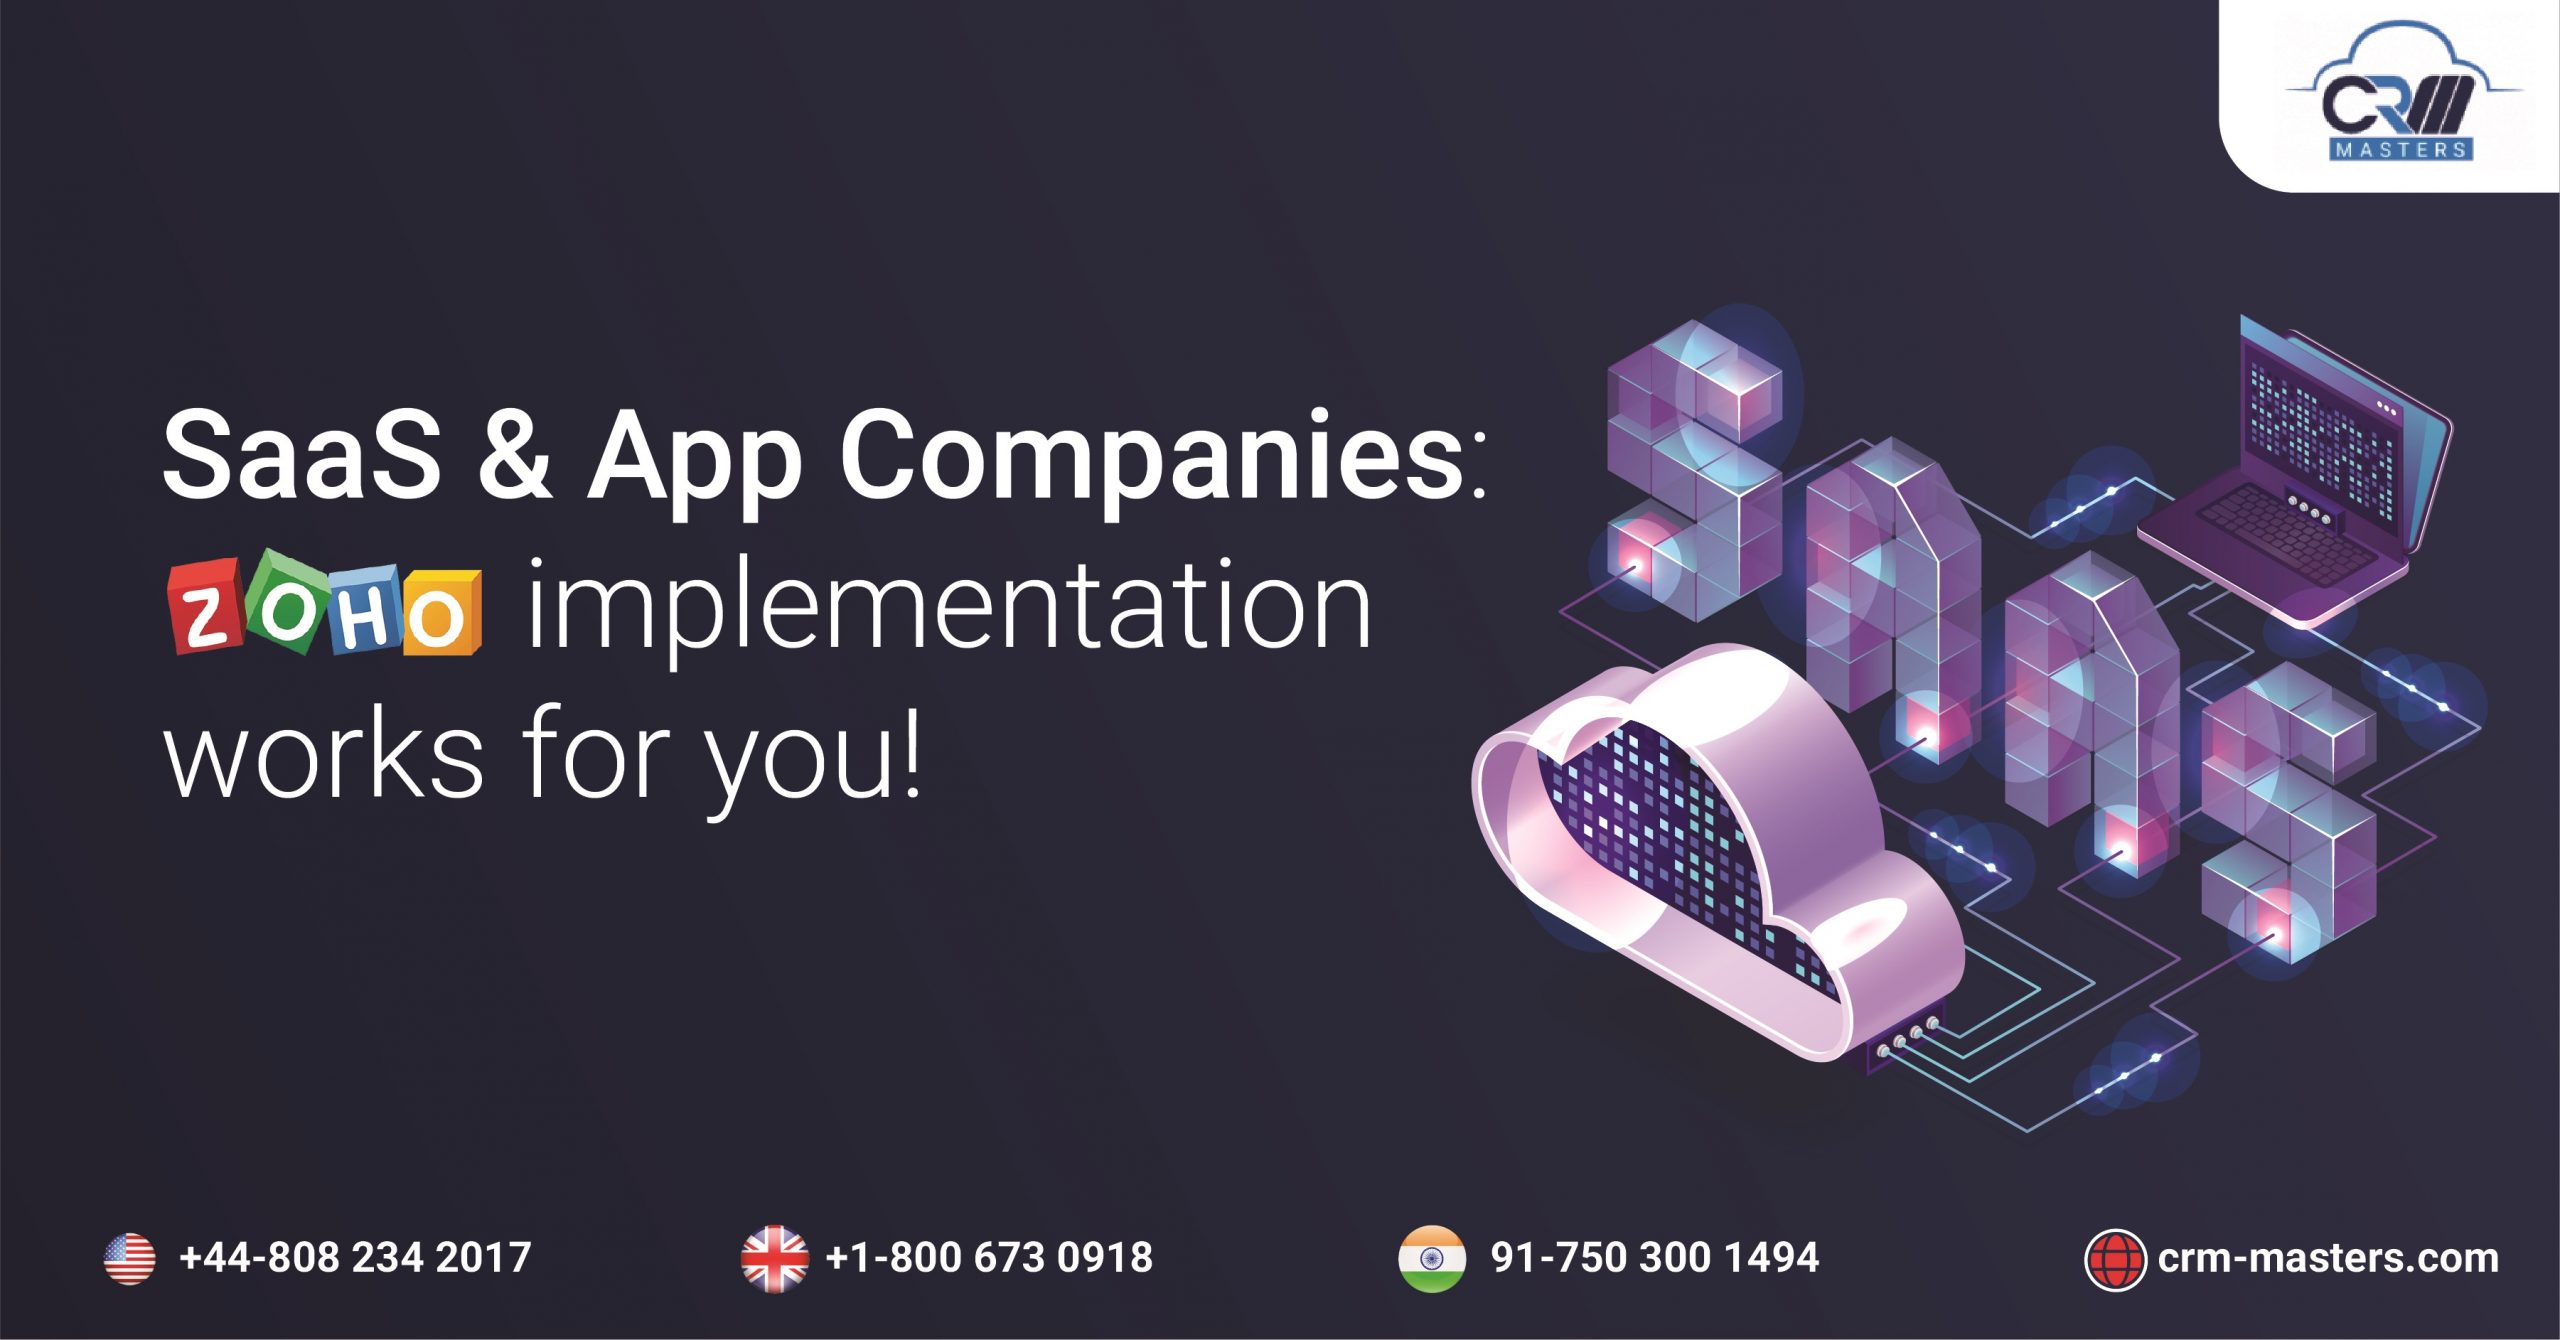 SaaS & app companies zoho implementation works for you!